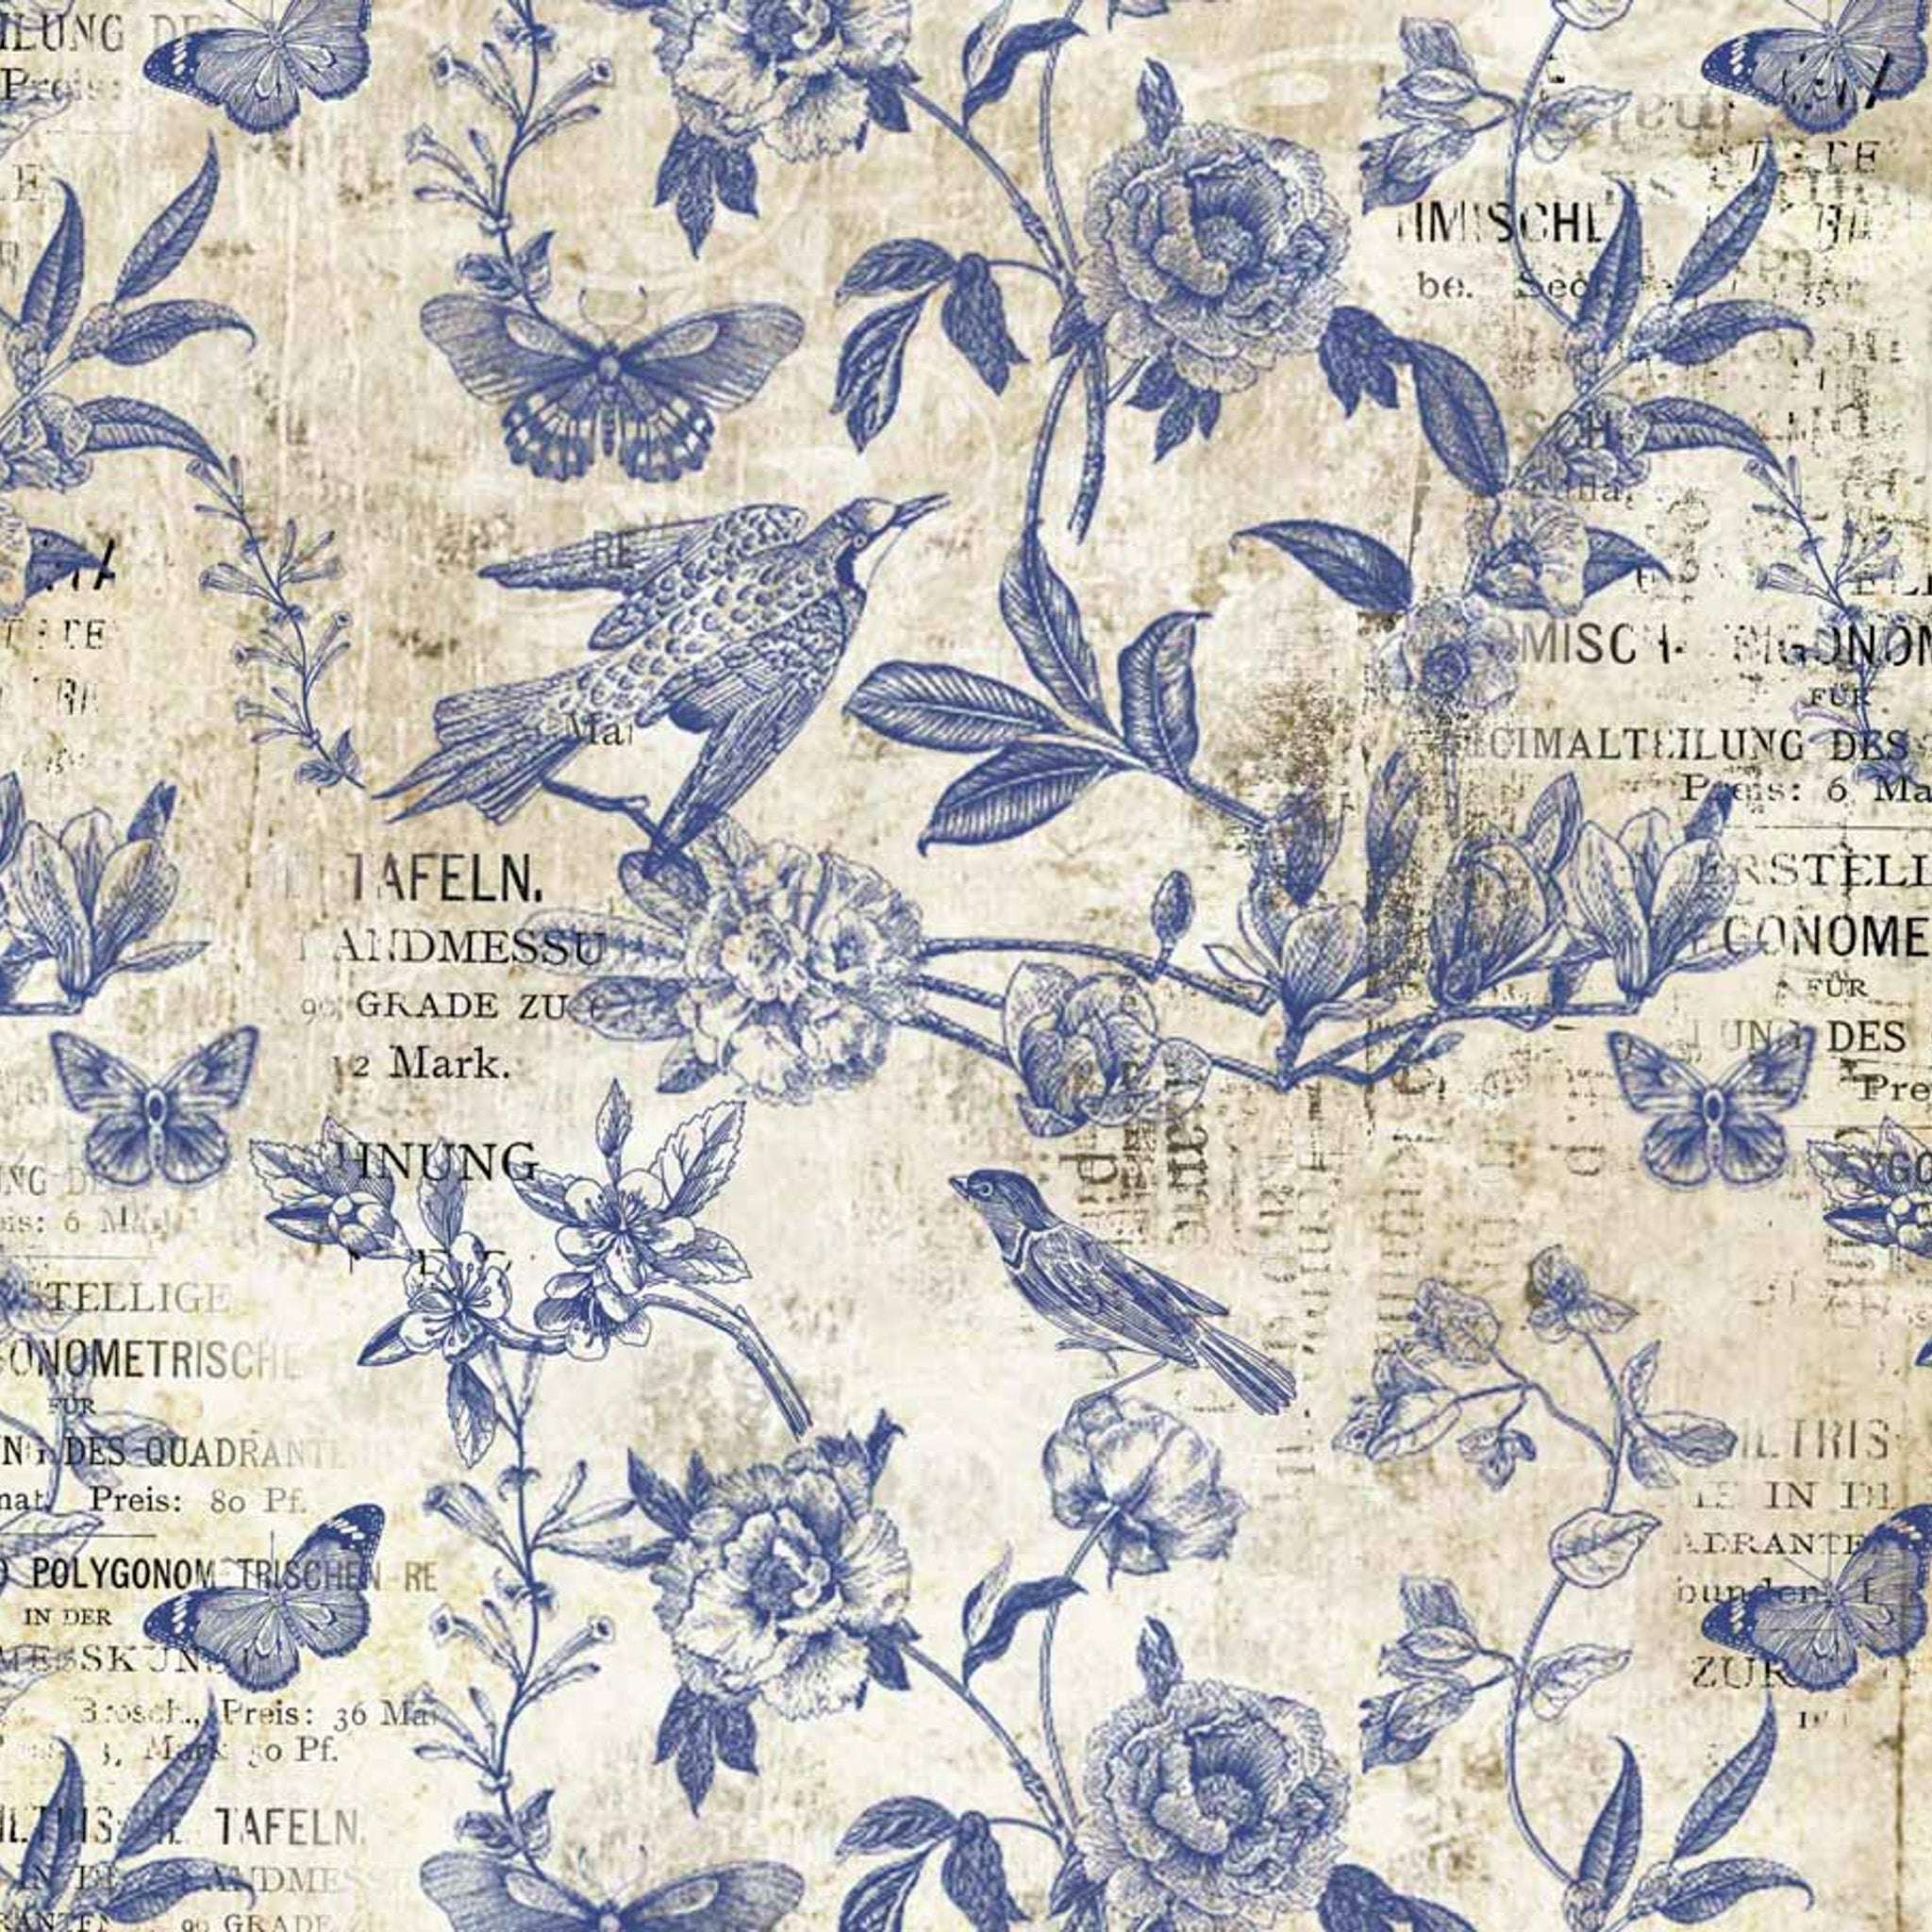 A2 rice paper design that features blue stamped birds, butterflies, and vining flowers on vintage magazine paper.